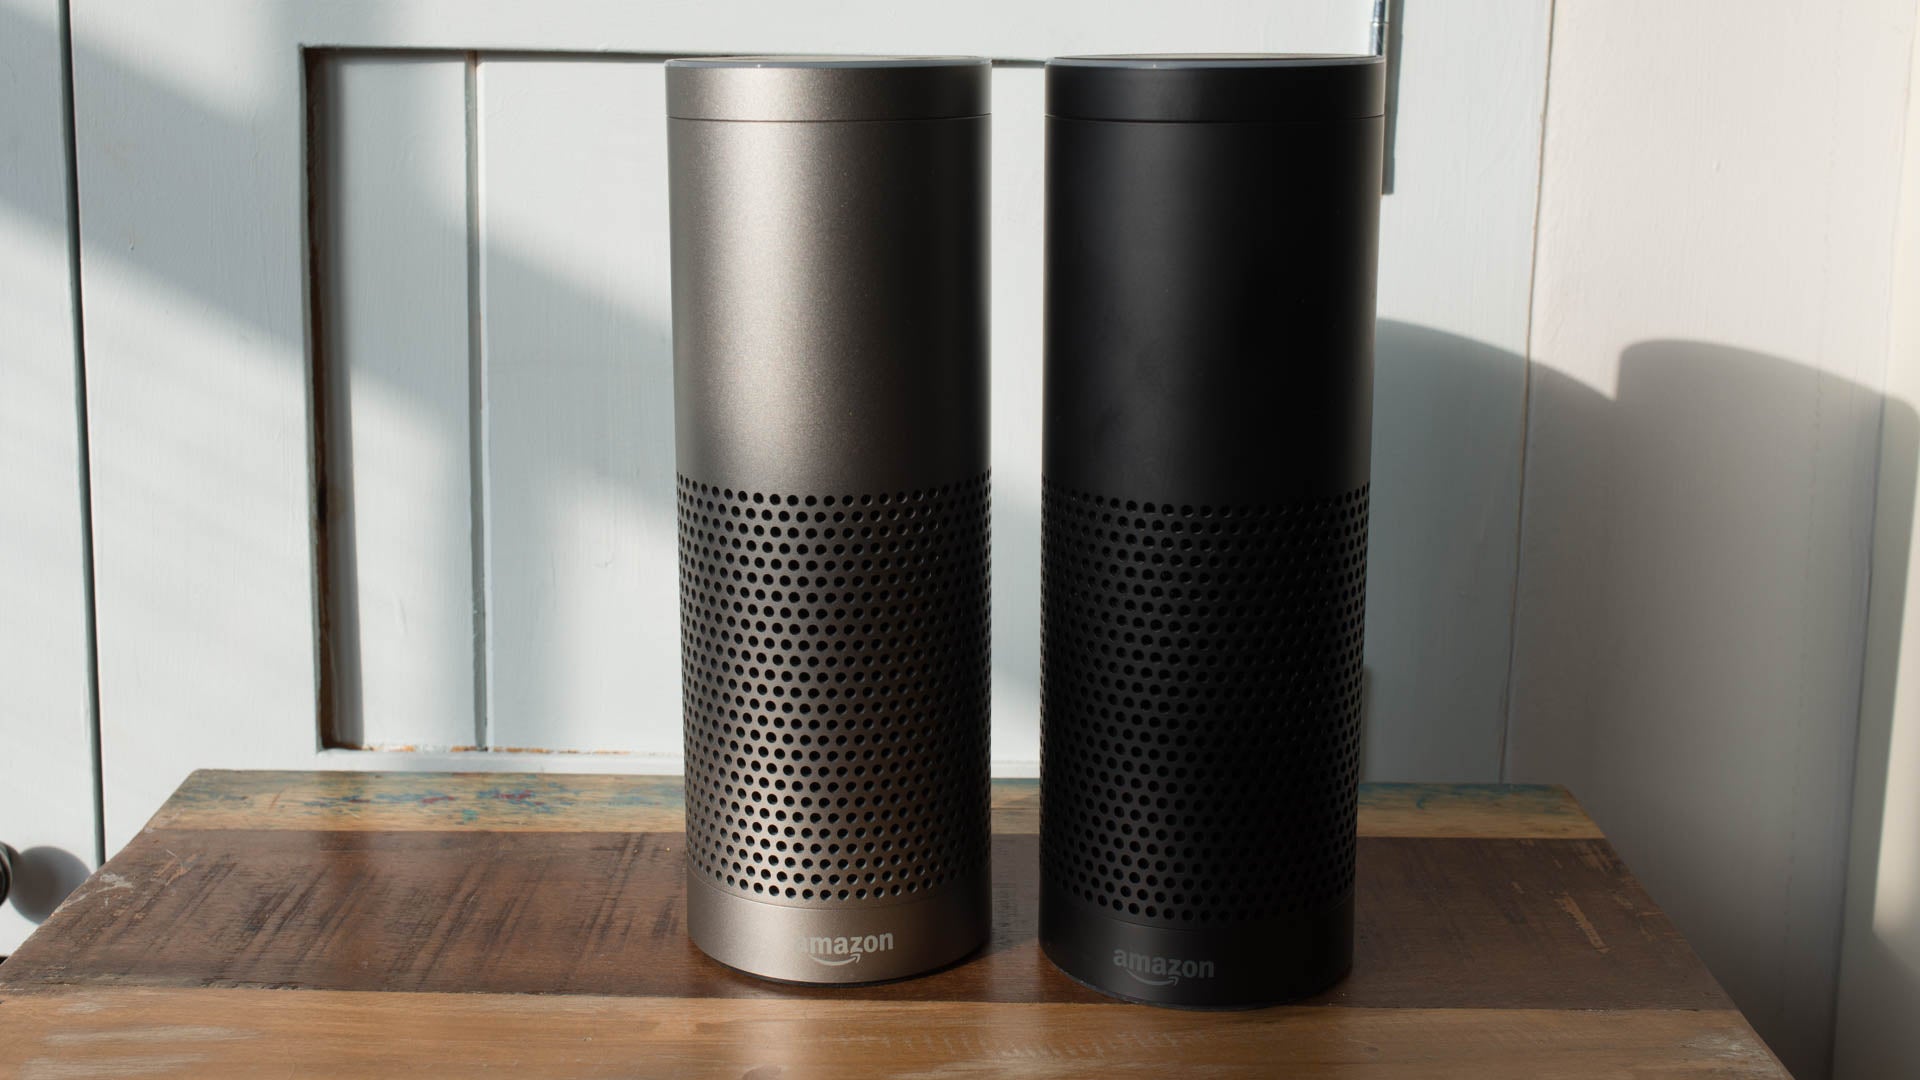 Silver and black Amazon Echo Plus devices on wooden table.